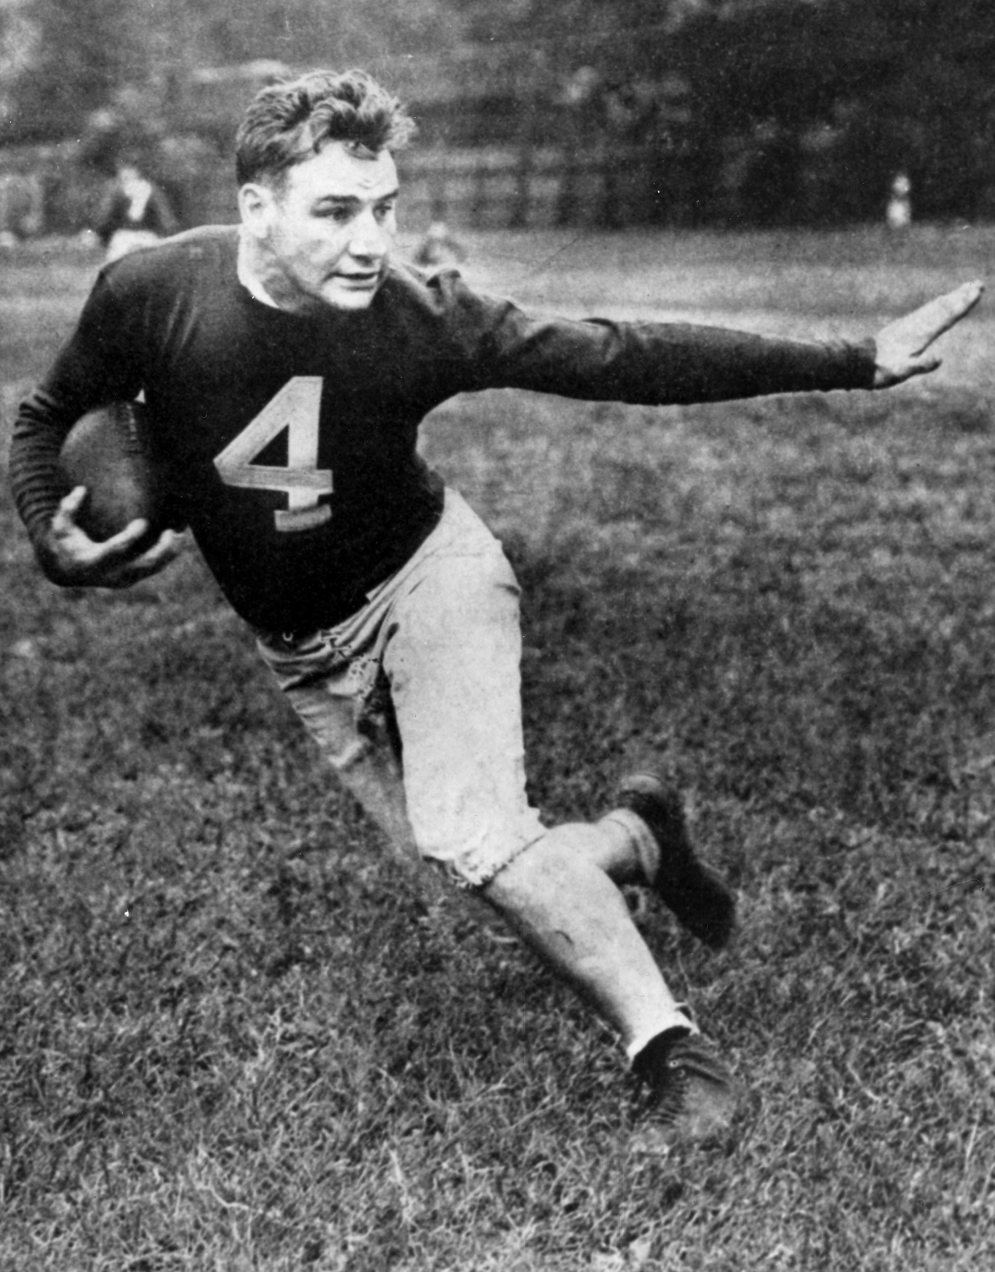 The New York Giants drafted&#xA0;fullback Alphonse &#x201C;Tuffy&#x201D; Leemans in the second round of the first NFL draft, after Wellington Mara, son of team owner, Tim Mara, watched Leemans star in a college game. Three seasons later, Leemans led the Giants to the 1938 NFL championship.&#xA0;